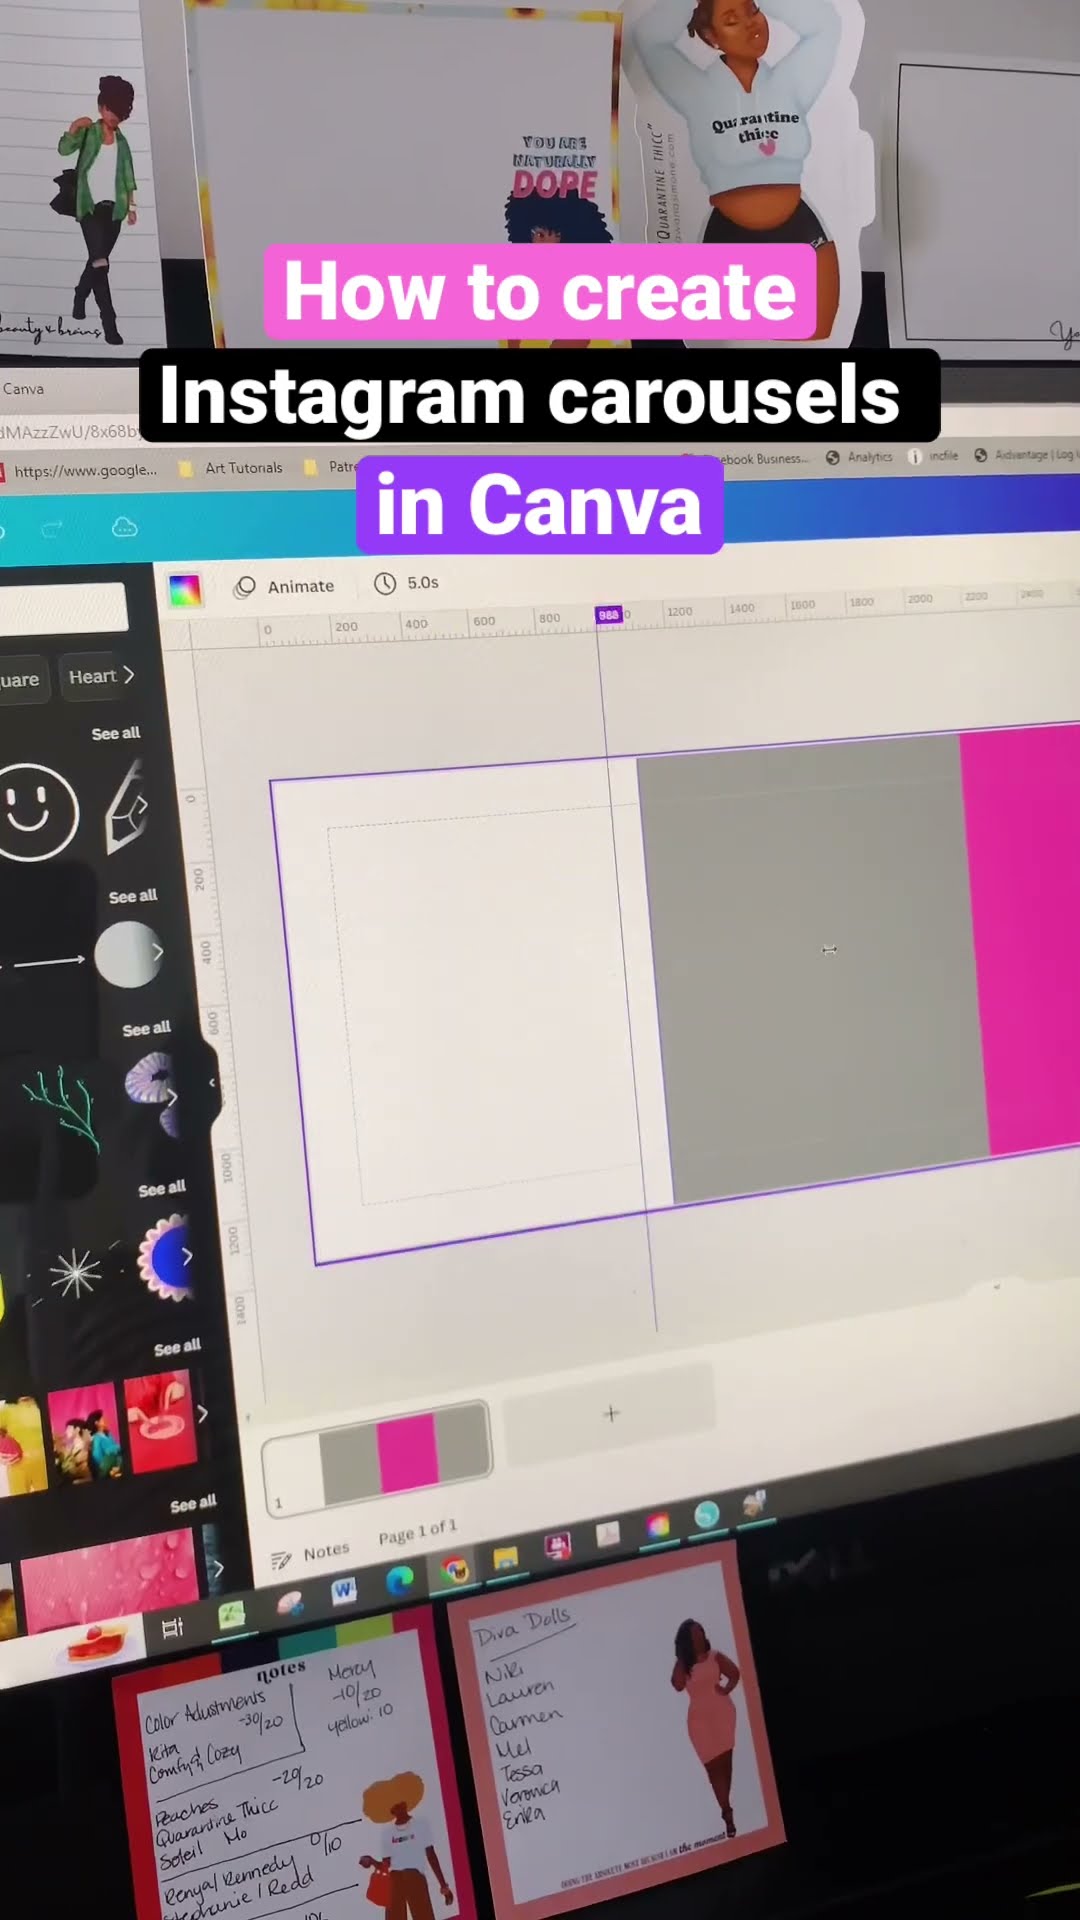 How to create Instagram carousel in Canva ️ #contentcreator #canvatutorial #instagramcarousel 